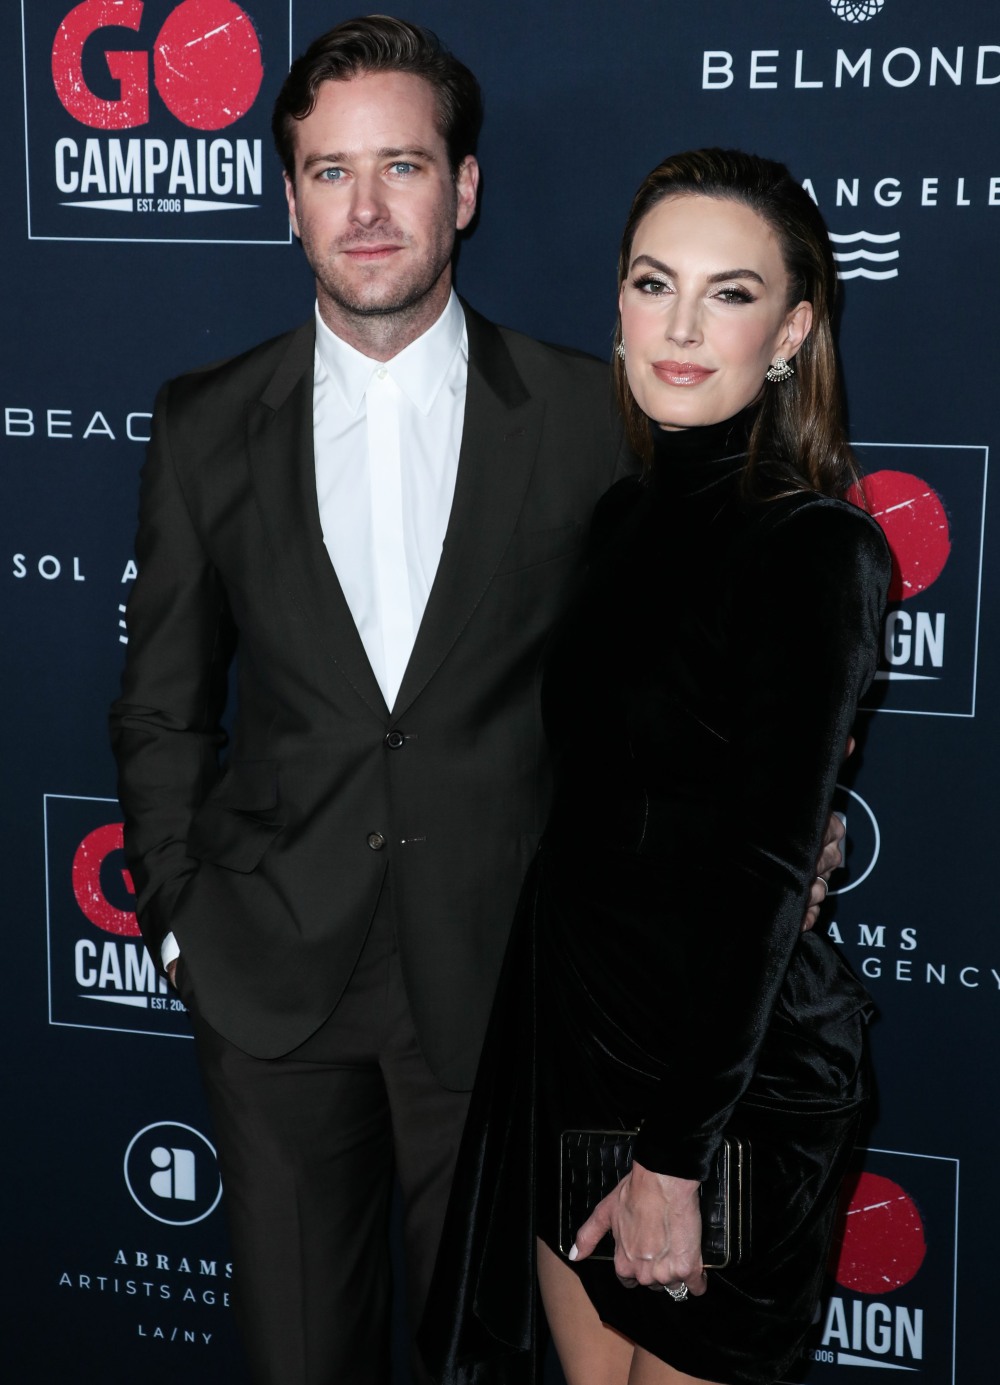 Actor Armie Hammer and wife Elizabeth Chambers arrive at the 13th Annual GO Campaign Gala 2019 held at NeueHouse Hollywood on November 16, 2019 in Hollywood, Los Angeles, California, United States.